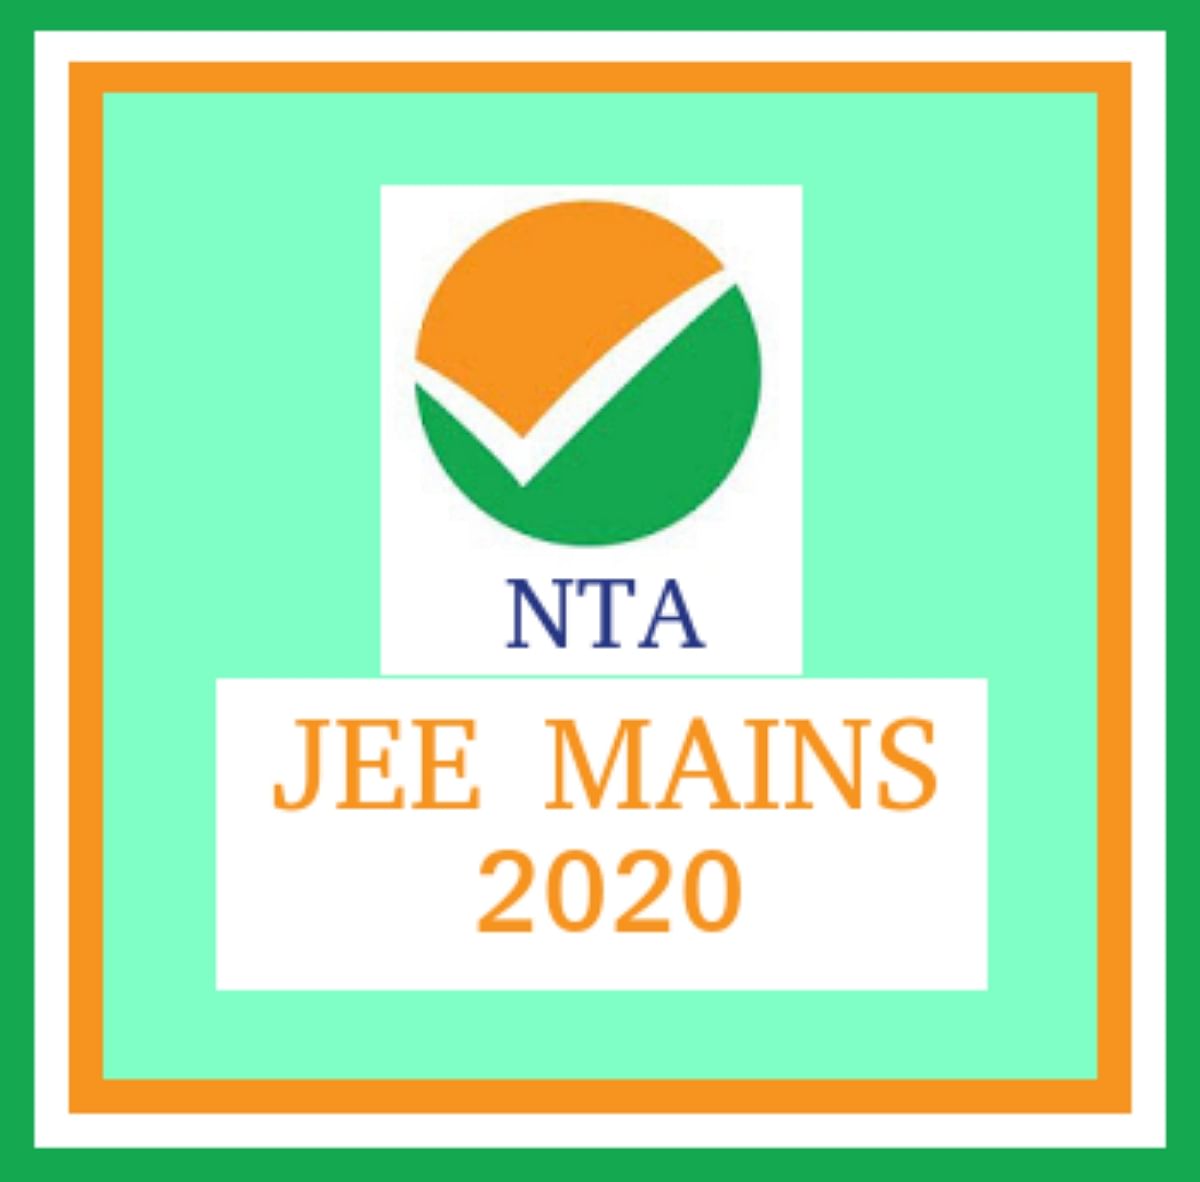 JEE Mains 2020 Admit Card Expected Soon, Check Details Here